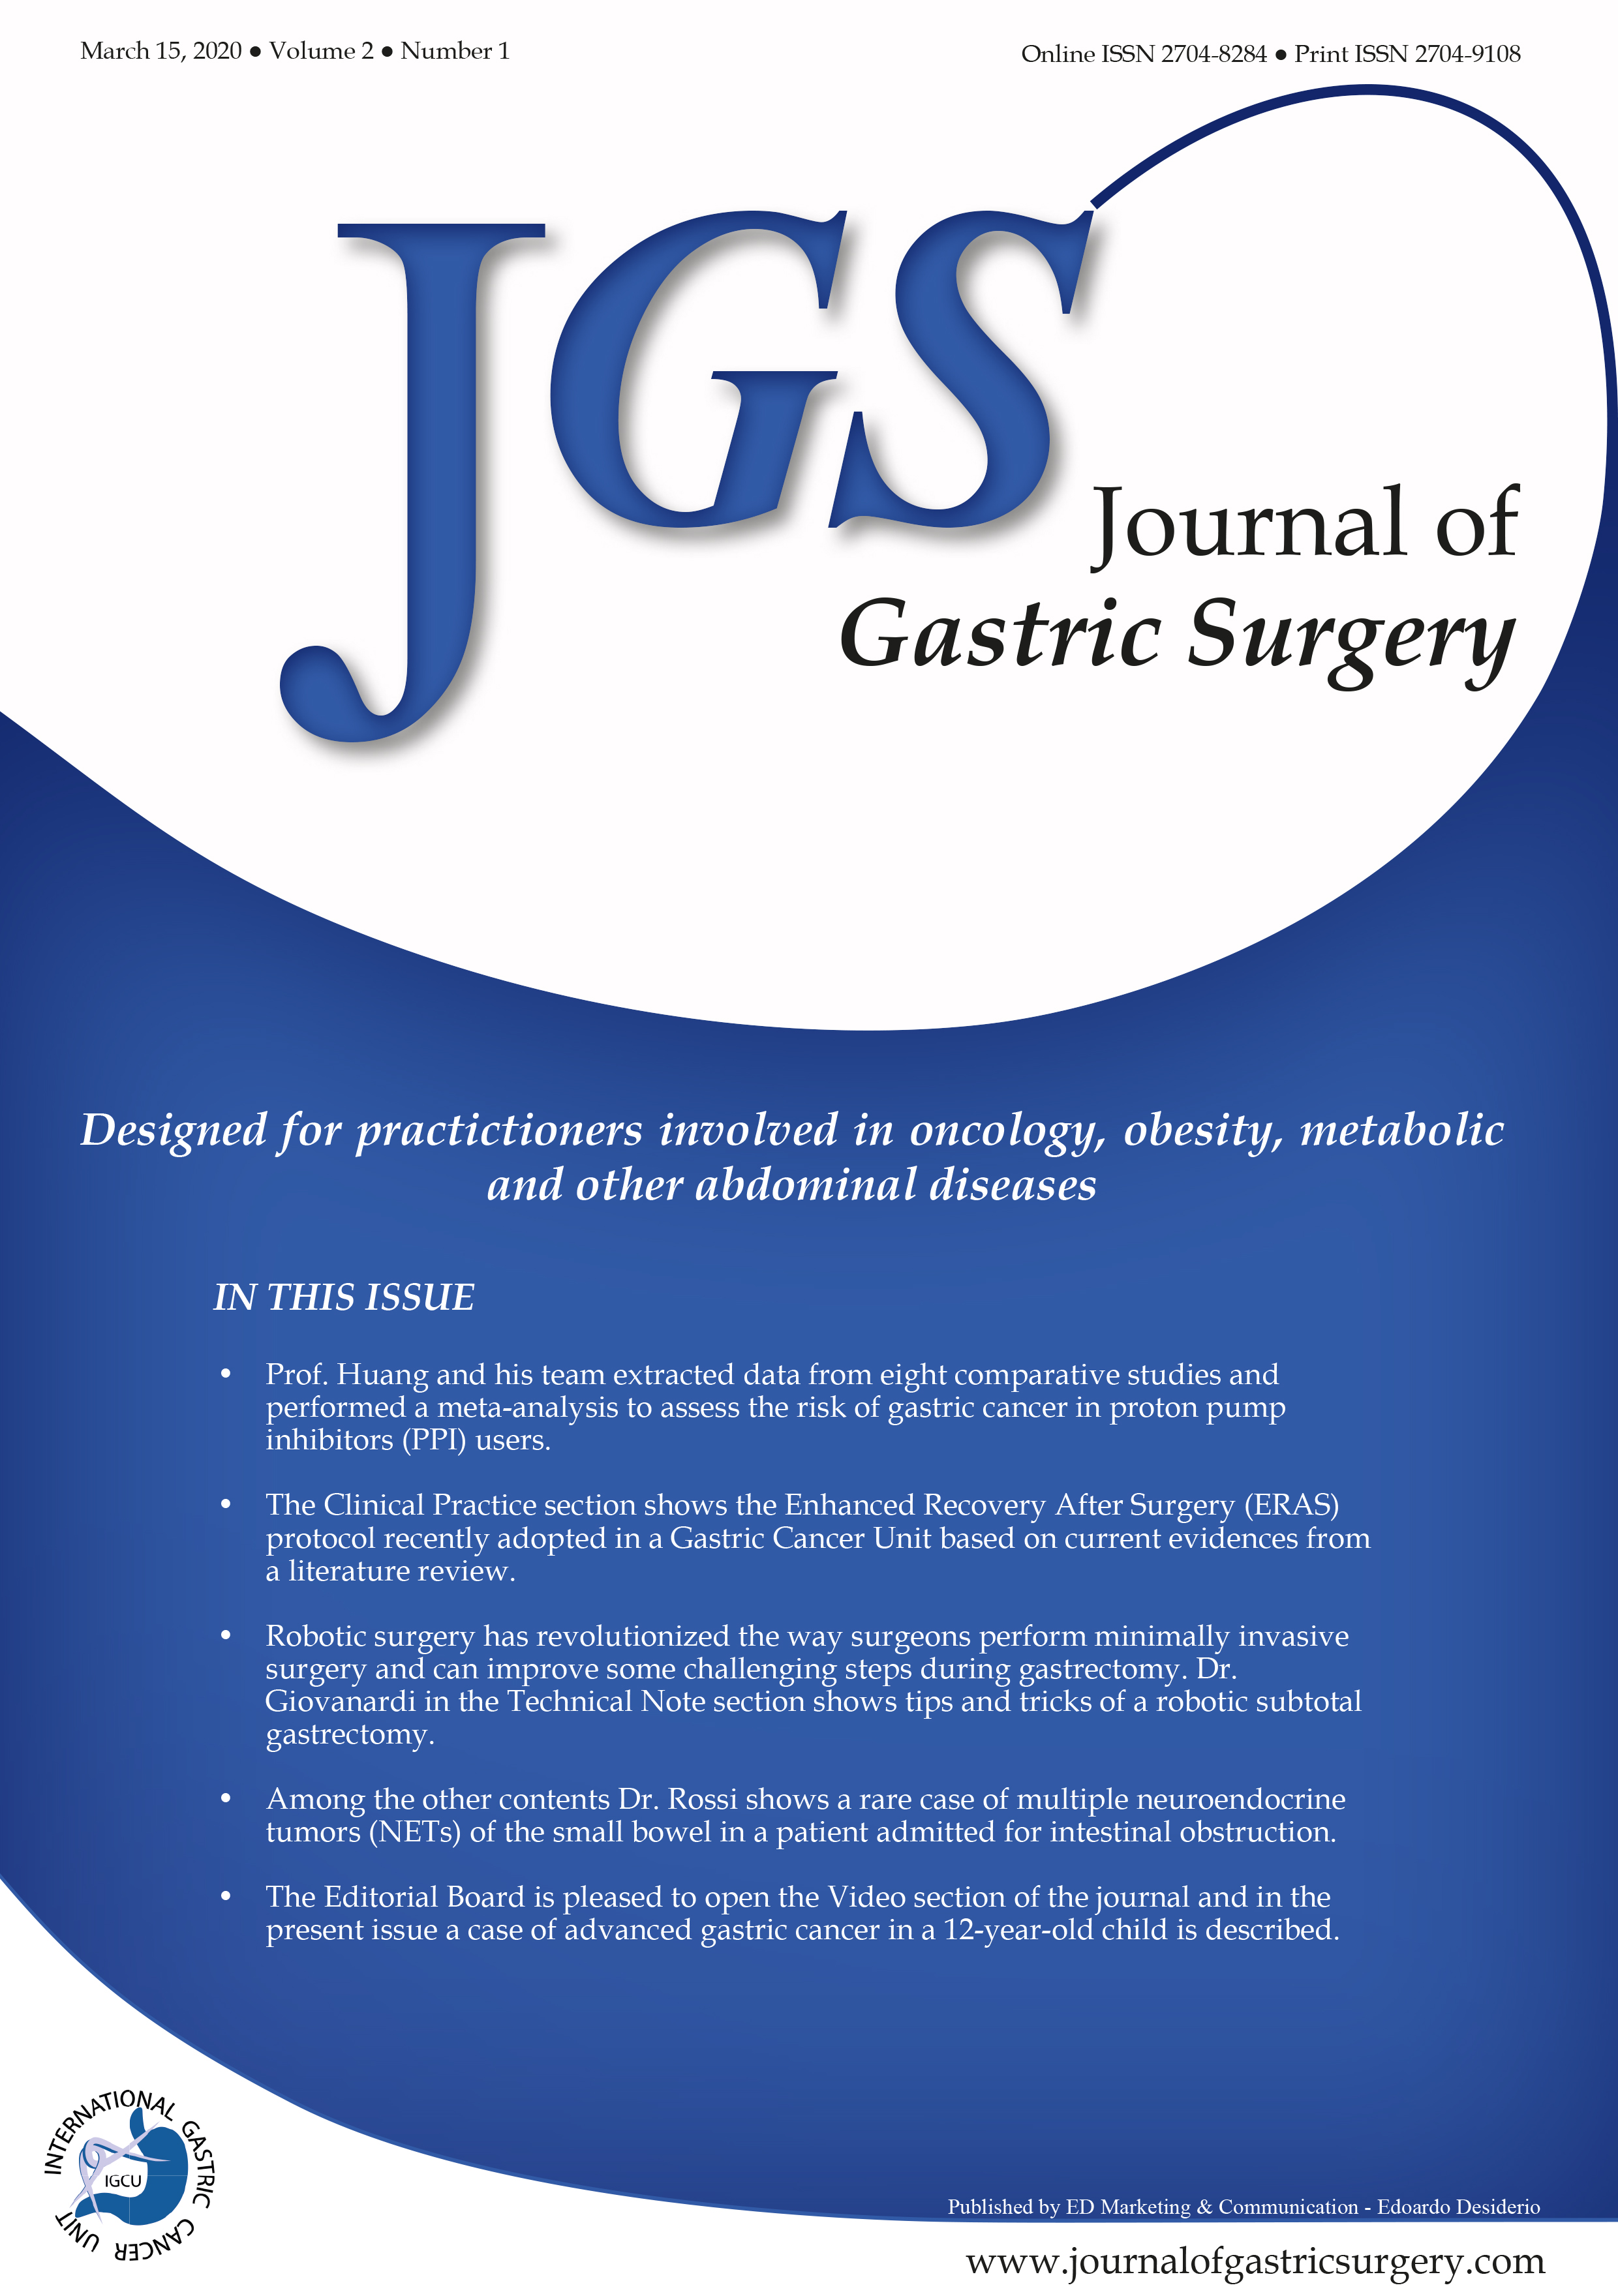 Journal of Gastric Surgery Vol 2 Issue 1 - Cover